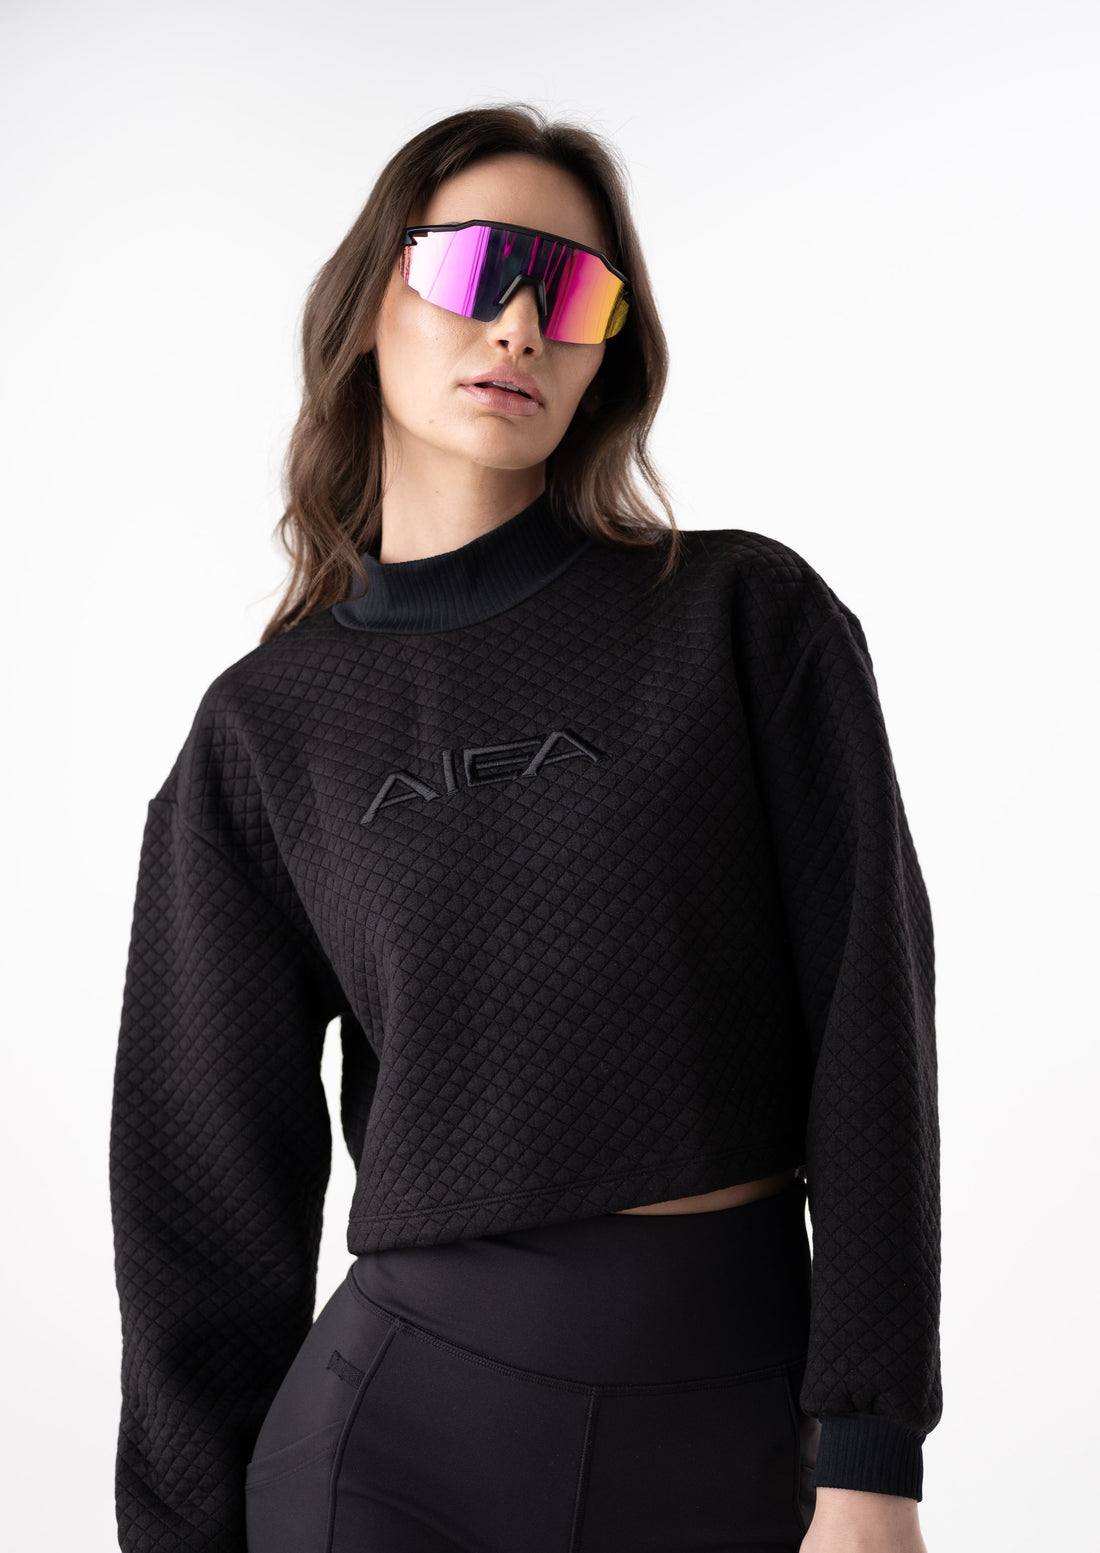 AIEA Golf textured pullover sweater in black with black embroidered central logo